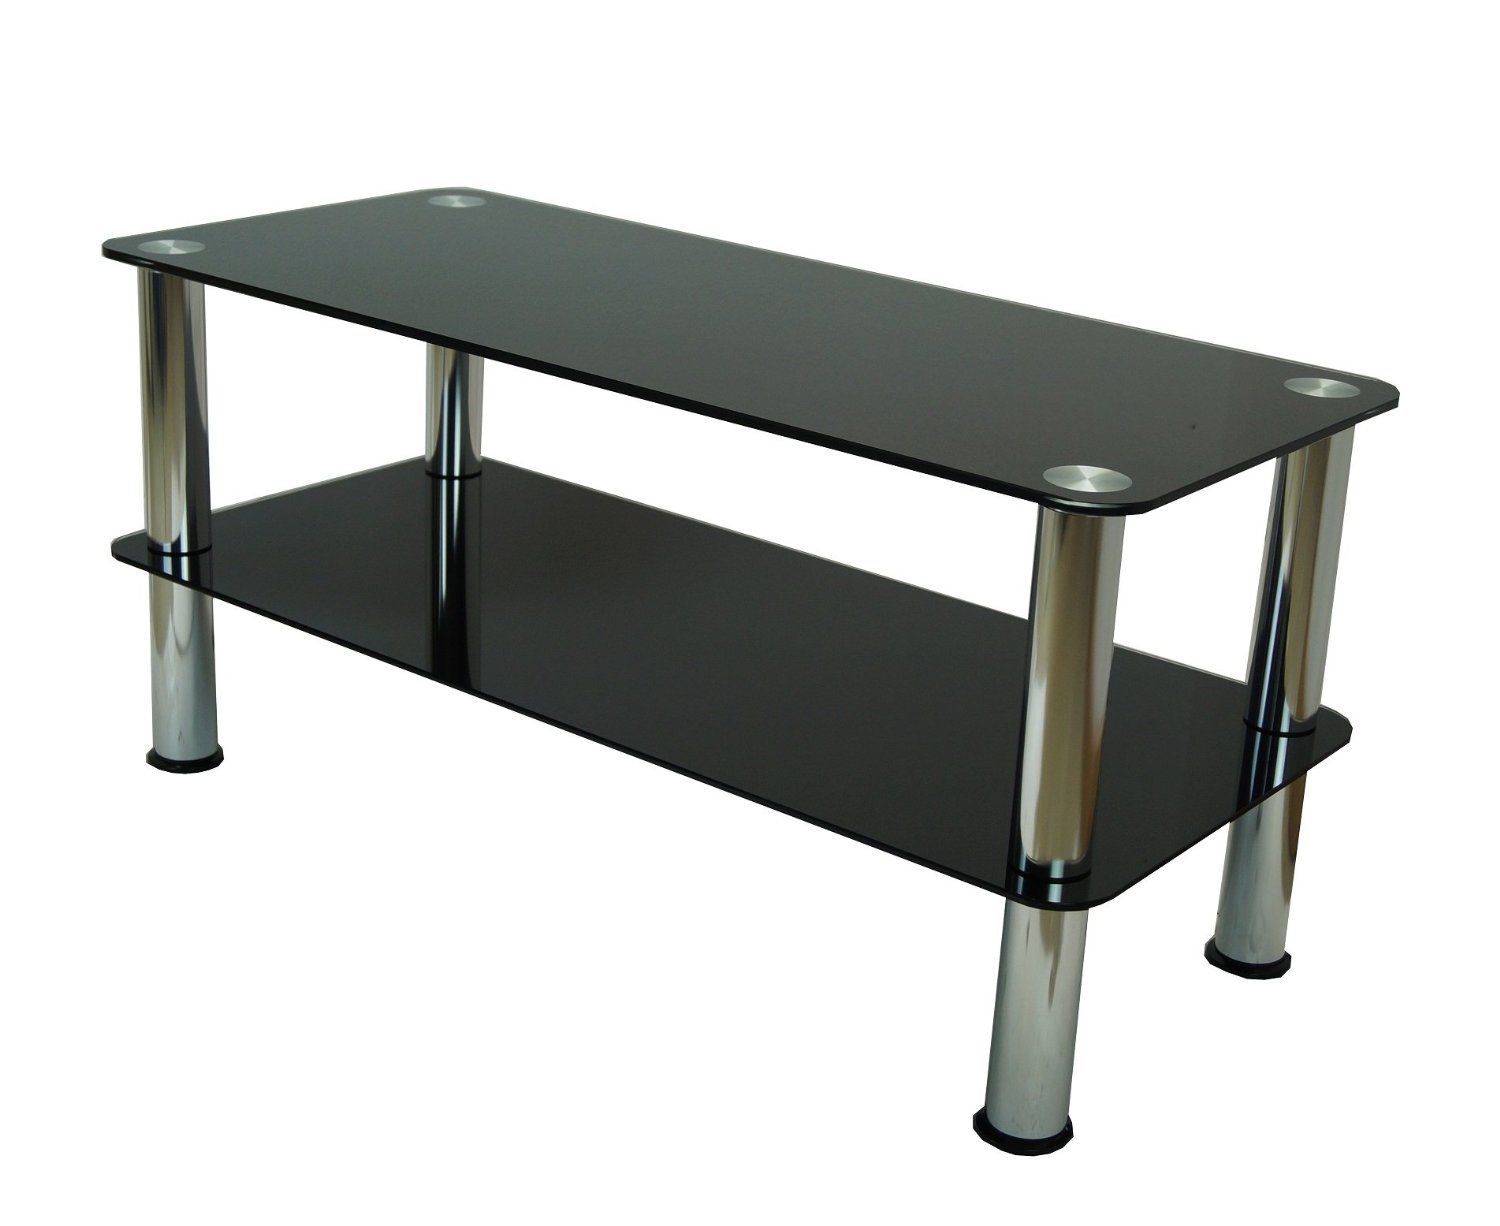 Traditional Glass Top Coffee Table Mountright Umsct Black Chrome Coffee Side Table Glass Tv Stand (View 6 of 10)